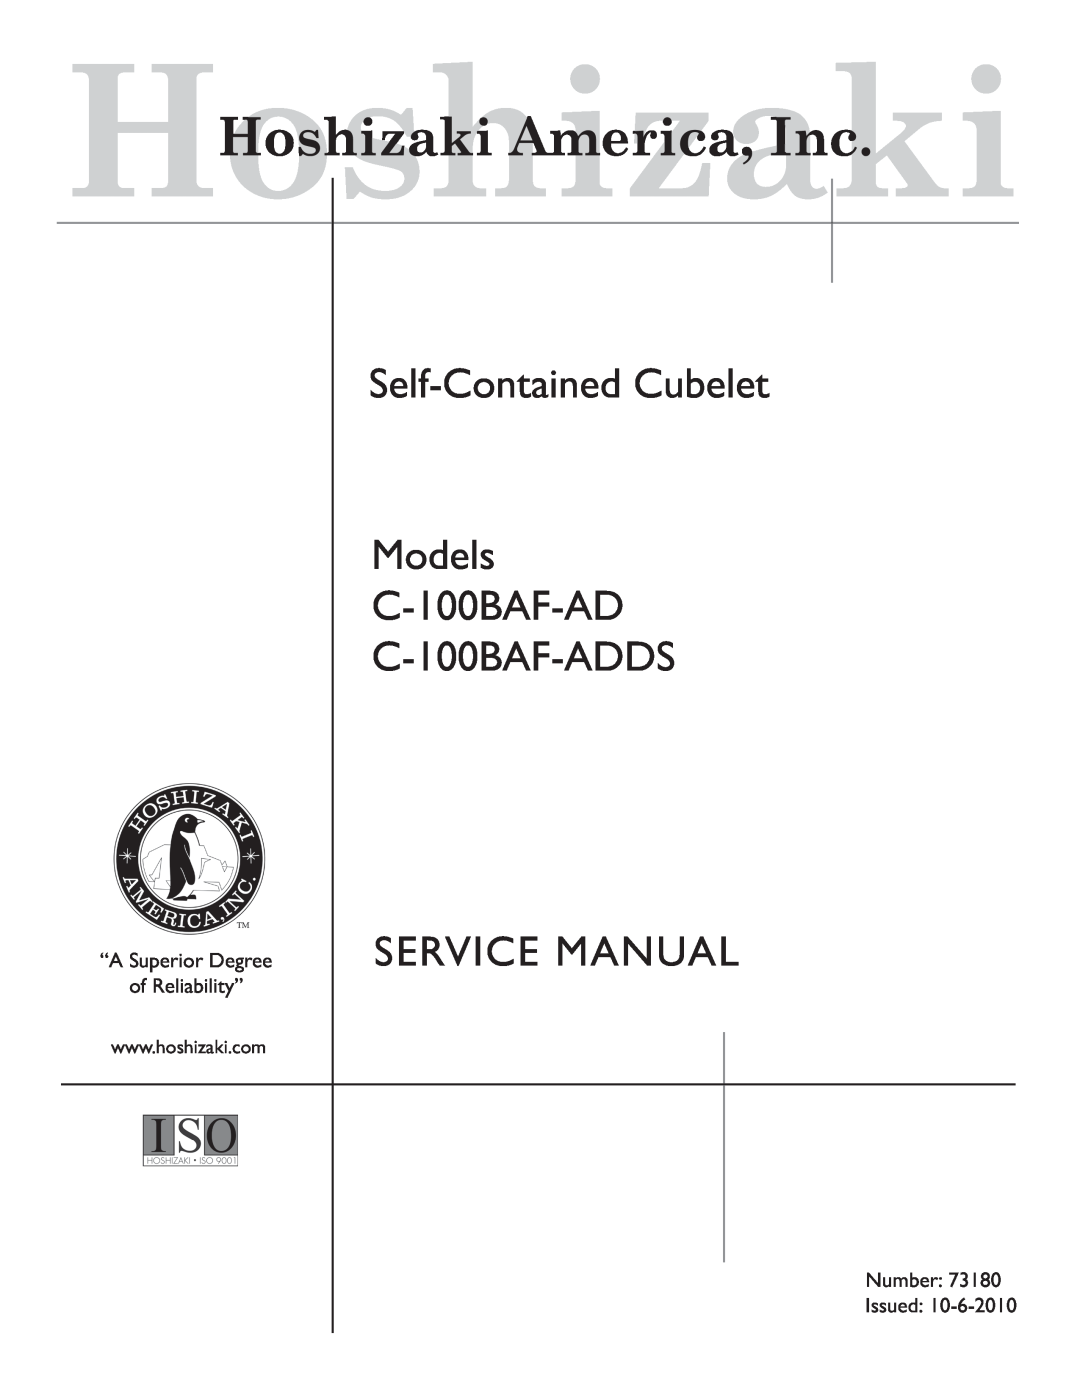 Hoshizaki service manual Self-ContainedCubelet Models C-100BAF-AD, “A Superior Degree of Reliability”, Number Issued 